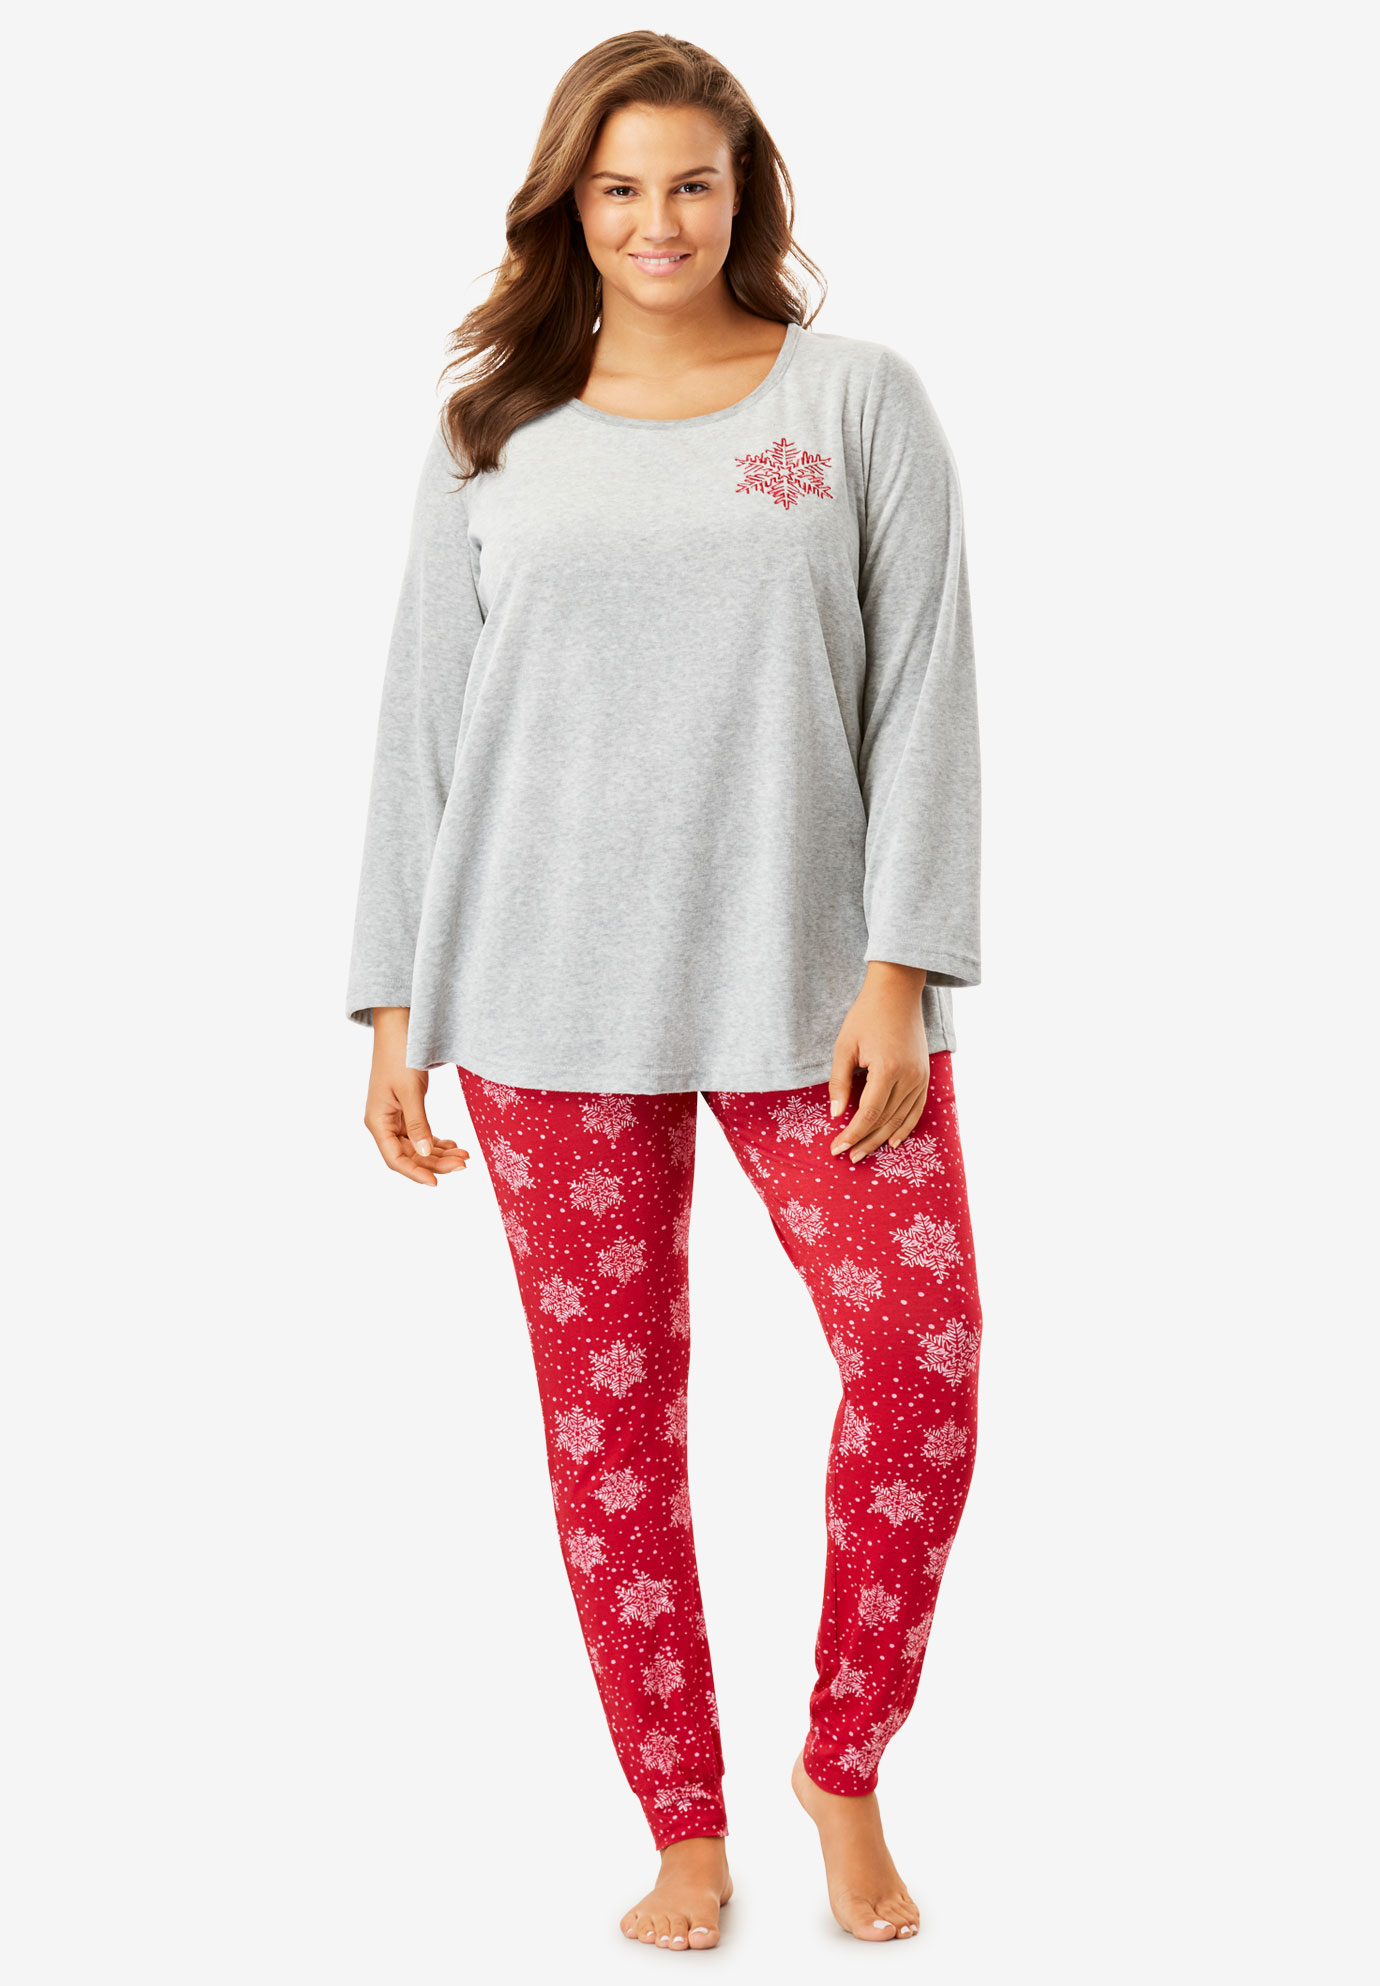 Embroidered Velour Pajama Set by Dreams & Co.®| Plus Size Sleepwear | Full Beauty